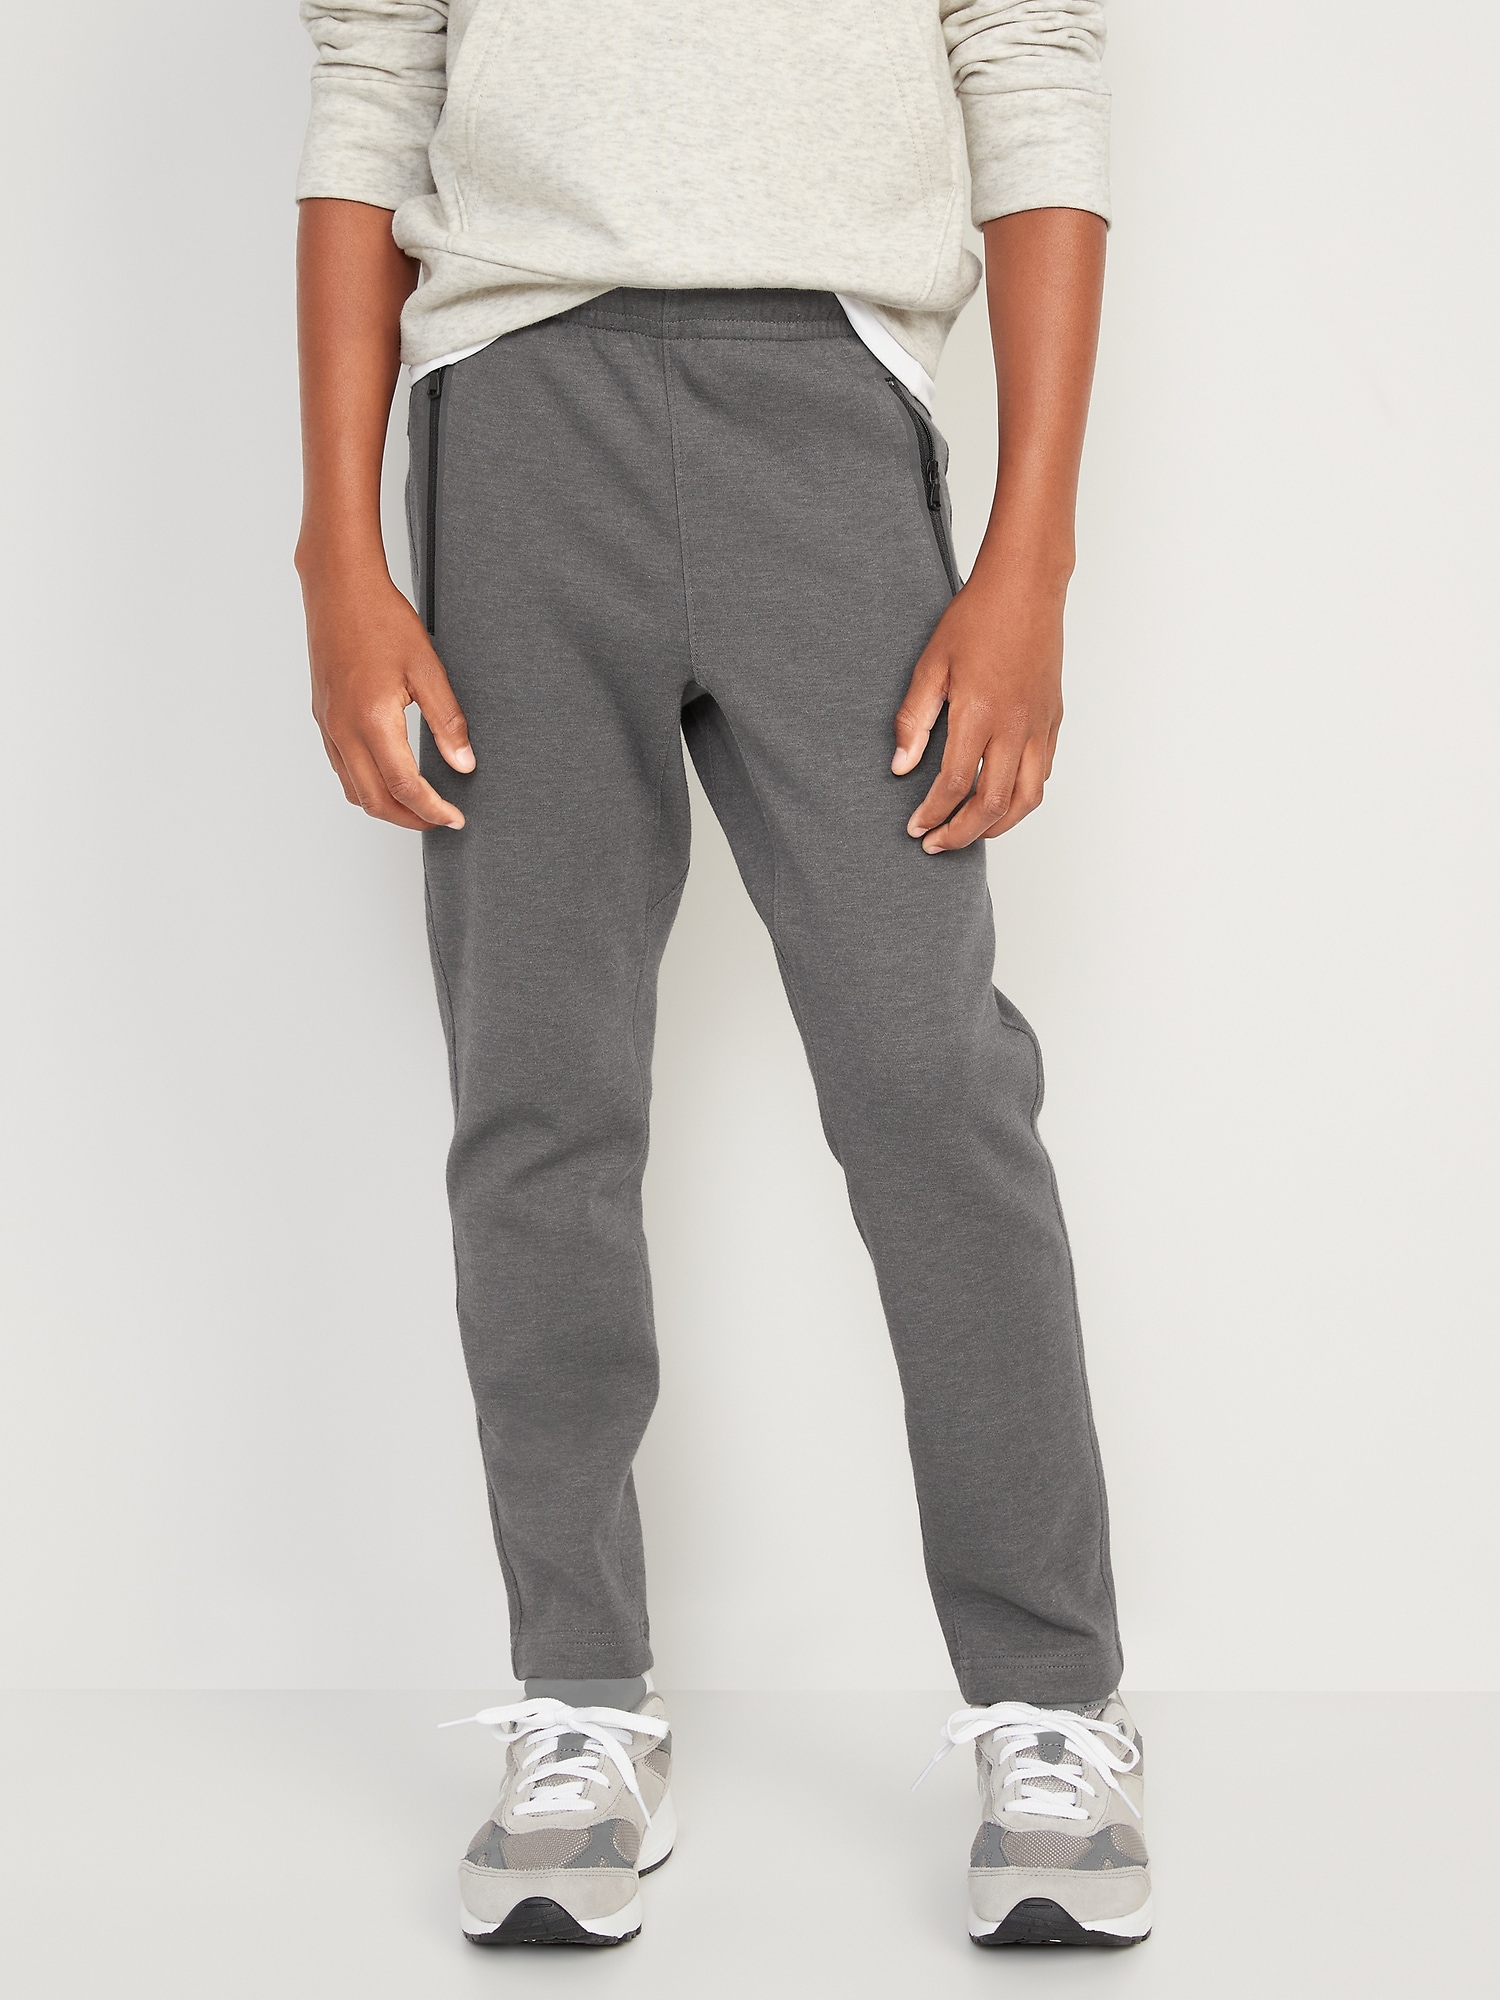 Dynamic Fleece Tapered-Fit Sweatpants for Men, Old Navy